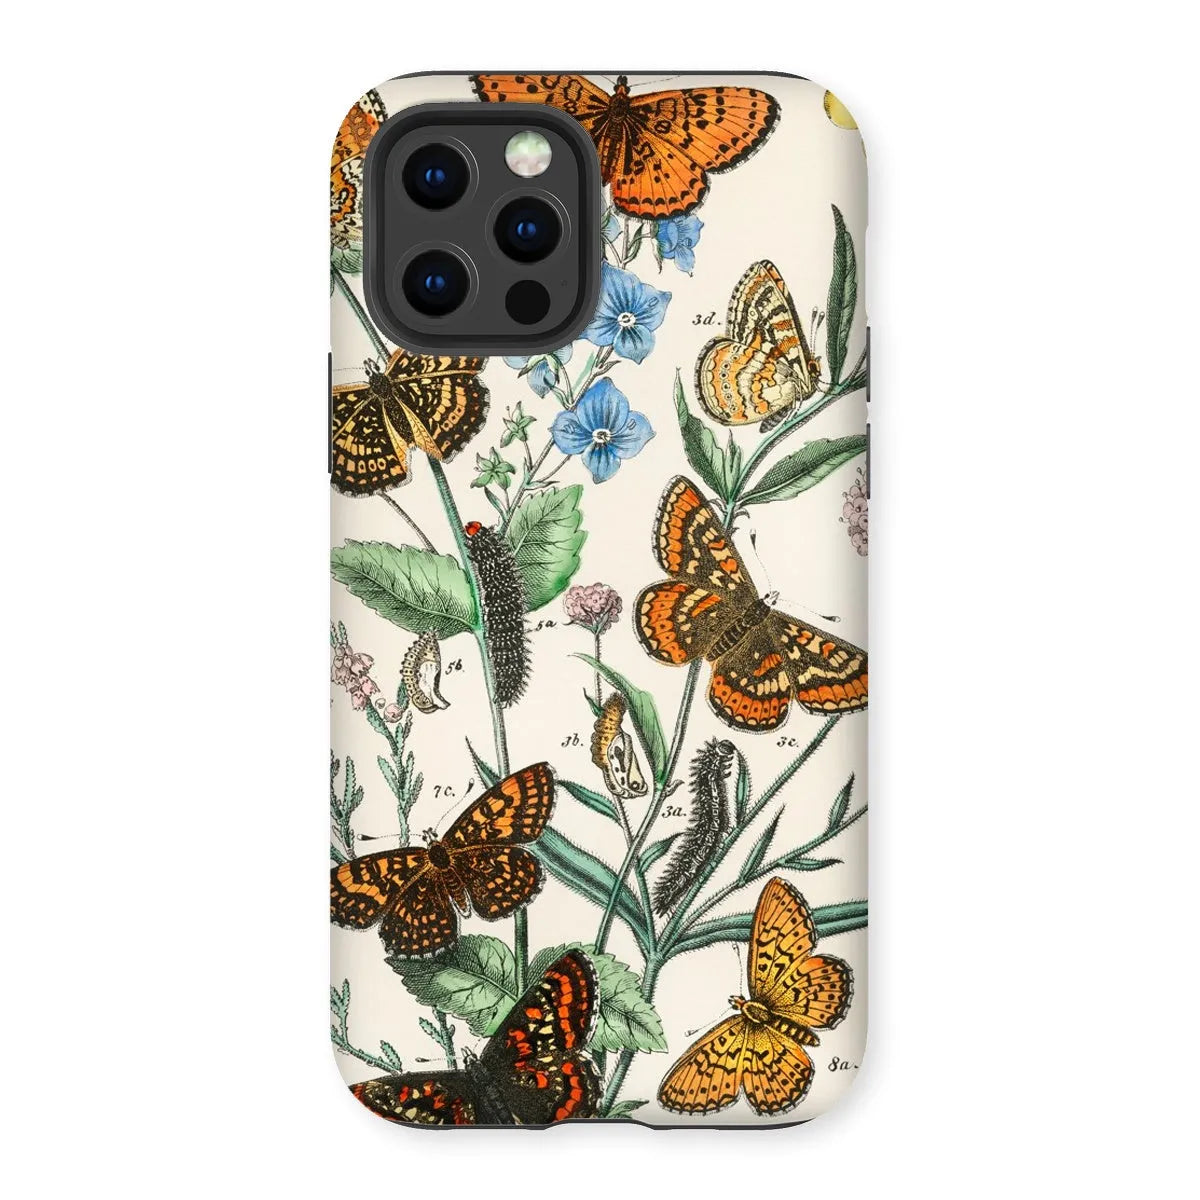 European Butterflies And Moths 2 Art Phone Case - William Forsell Kirby - Iphone 12 Pro / Matte - Mobile Phone Cases